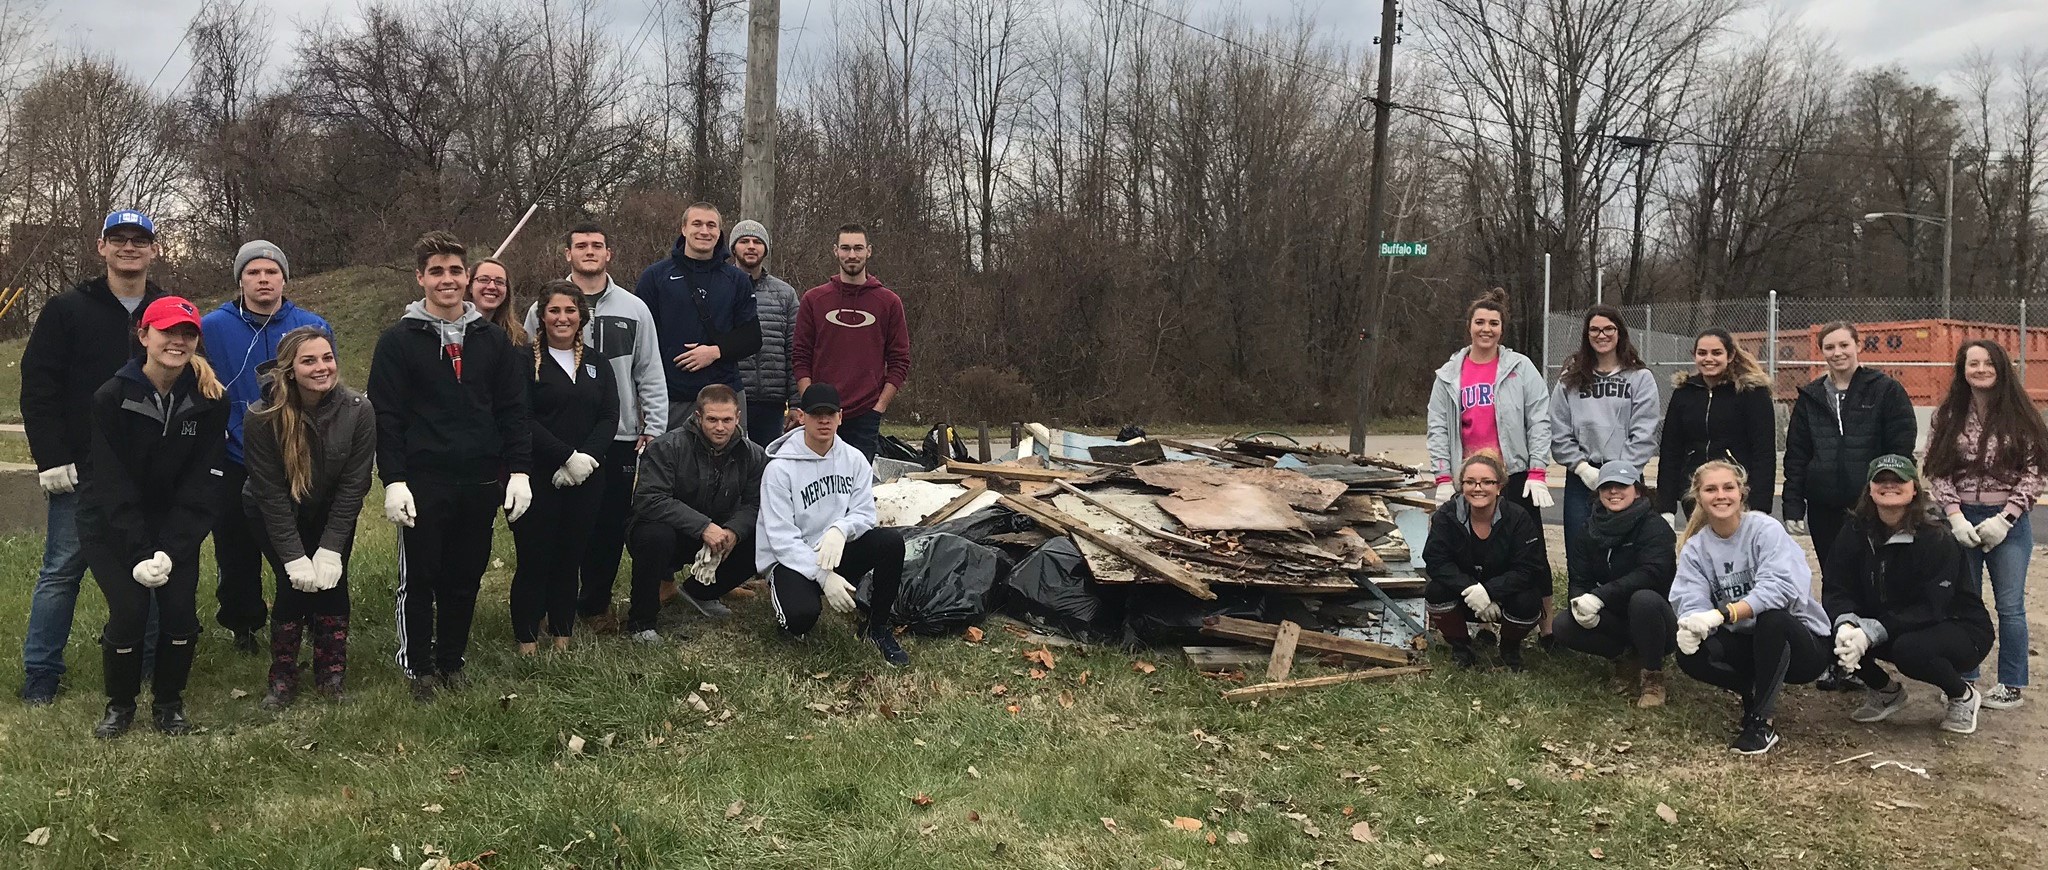 Students in the Environmental Problem Solving class at Mercyhurst University show off their illegal dumpsite cleanup. Pictured from left to right: Dominick Funari, Oran Horn, Cassandra Ellis (front row), Alicia McNulty (front row), Jimmy Szefler, Johanna Quinn, Georgia Capotis, Quinn Walsh, Daniel-Ramroth Finnegan, Bradley Novak (front row), Andrew Too-a-Foo (front row), Jordan Murray, Harison Laskey, Cameron Lewis, Hannah Rausch, Lia Velazquez-Hueck, Kali Carter, Elise Lashinsky, Julia Raymond (front row), Kelly Wagner (front row), Taylor Balser (front row), and Jessi Topping (front row).